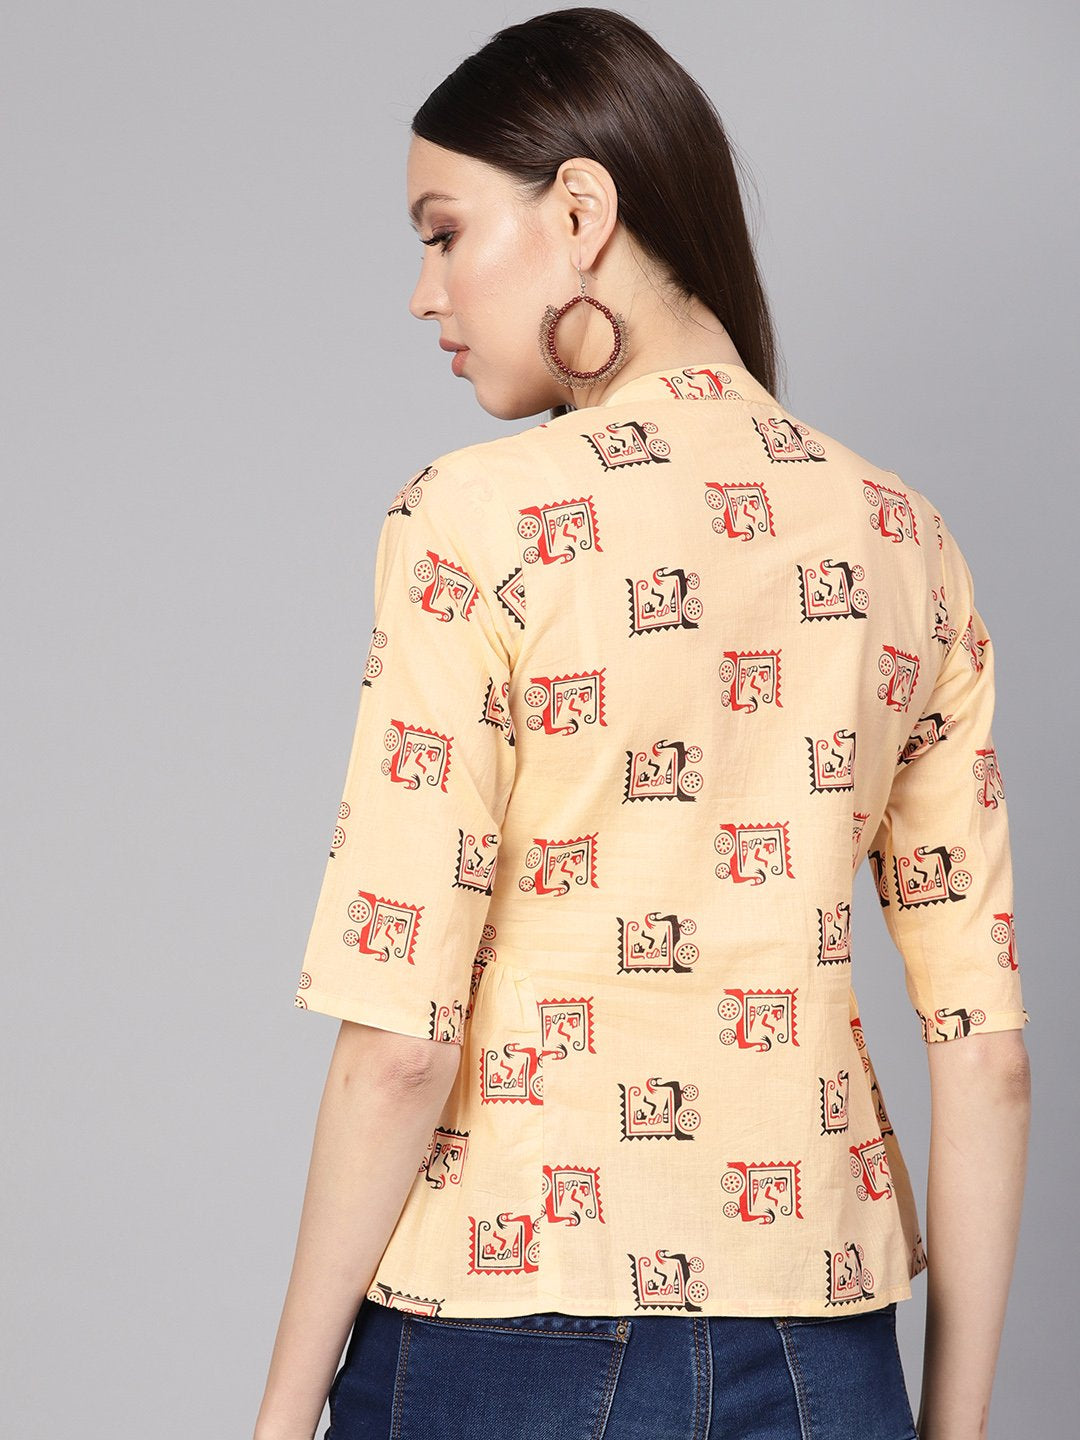 Women's Cream-Coloured & Red Printed Shirt Style Top - Nayo Clothing